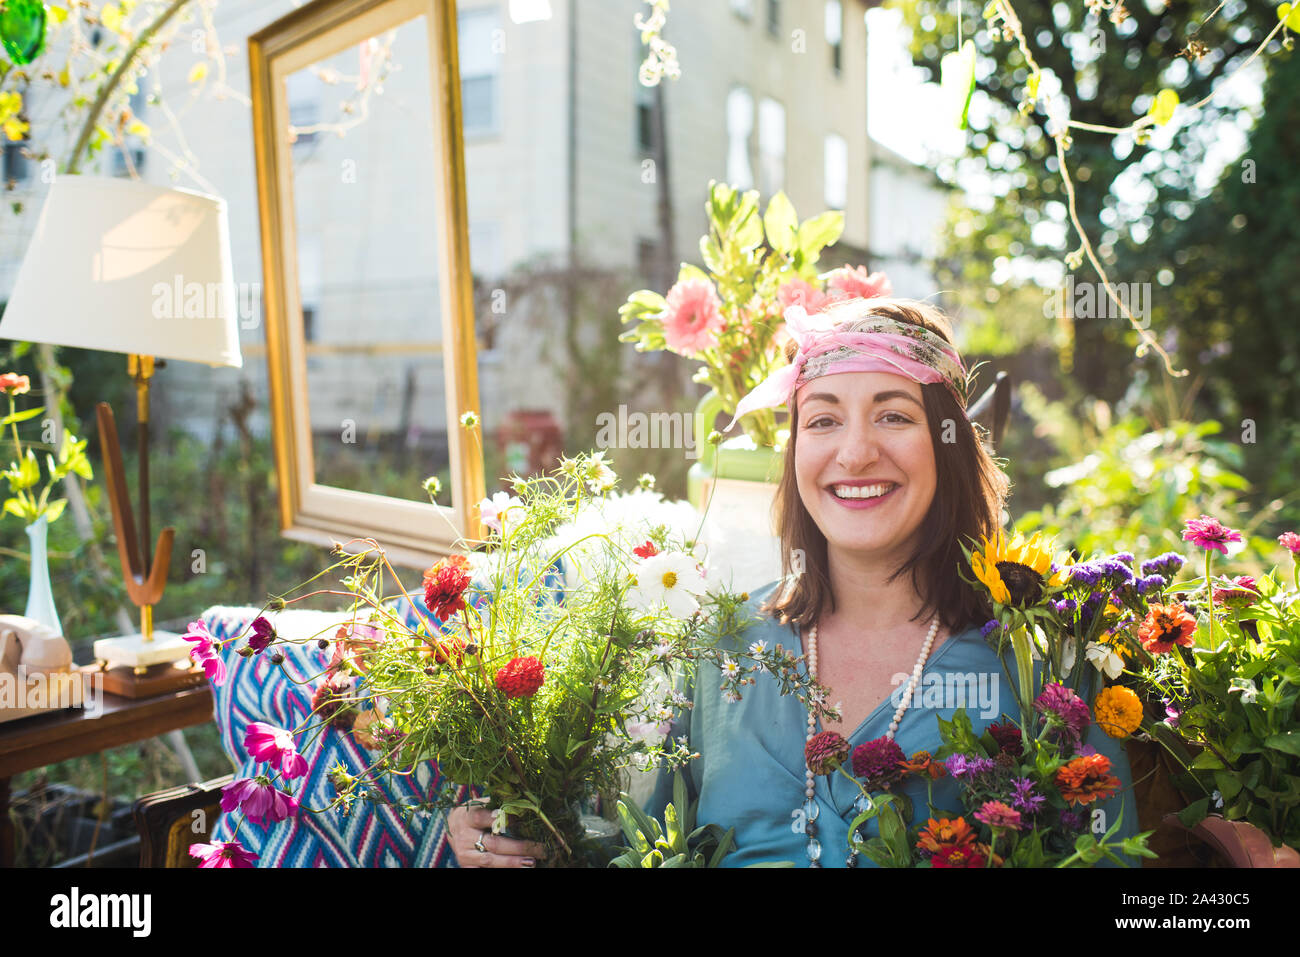 smiling woman in a garden with flowers Stock Photo